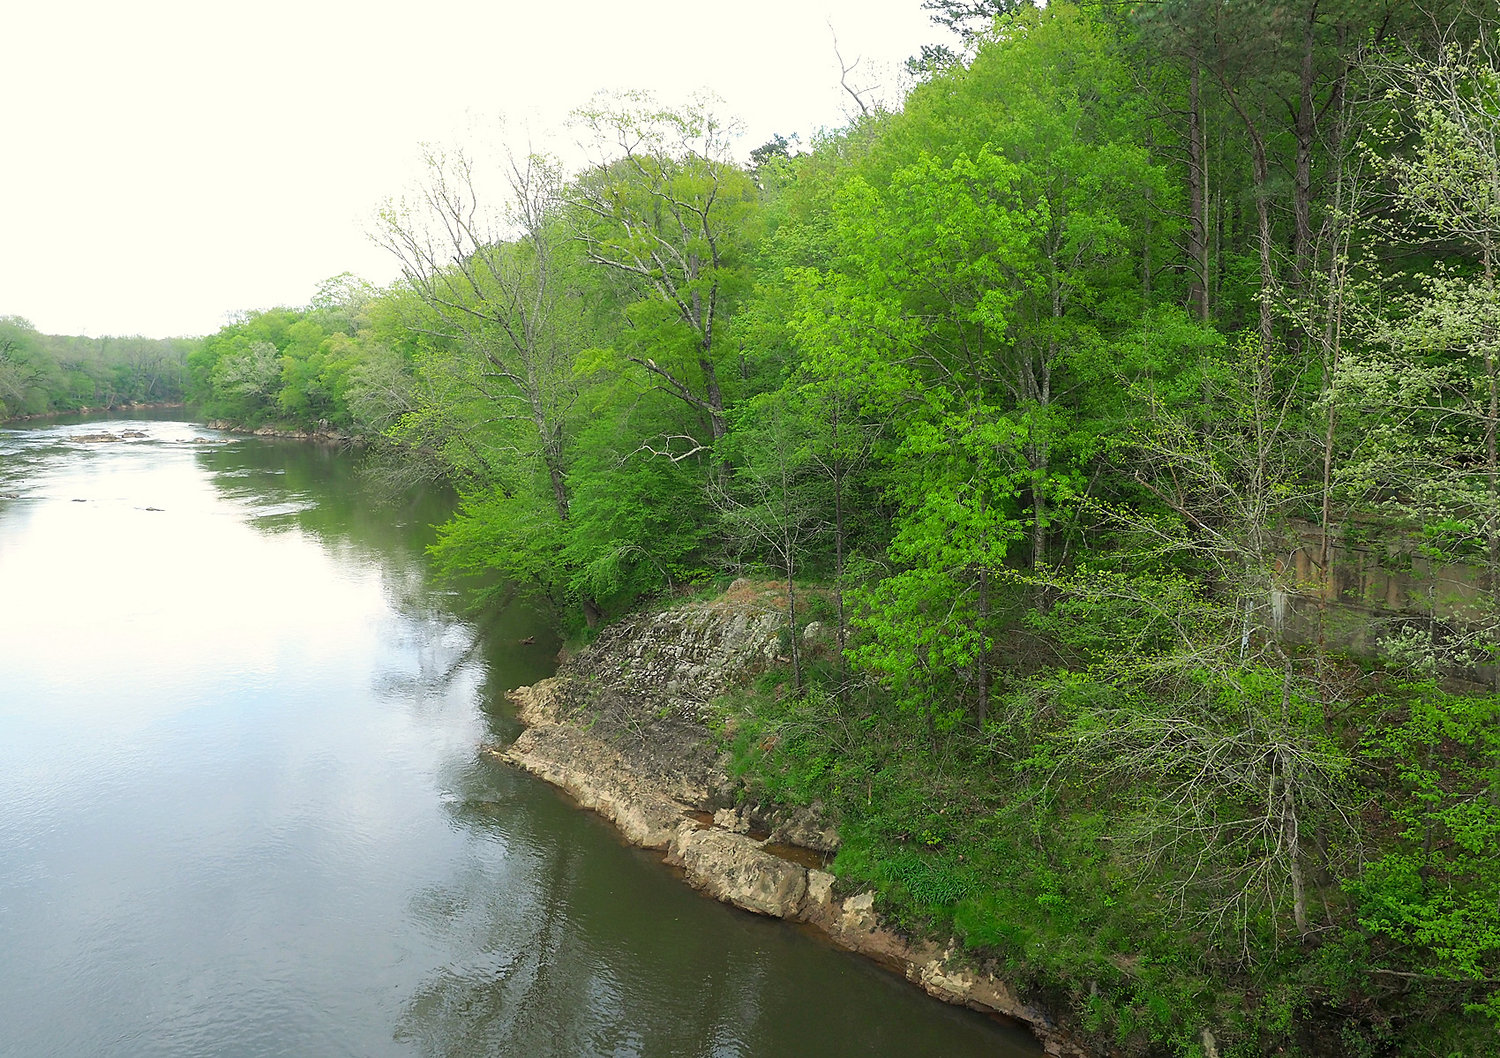 A bank of the Haw River.